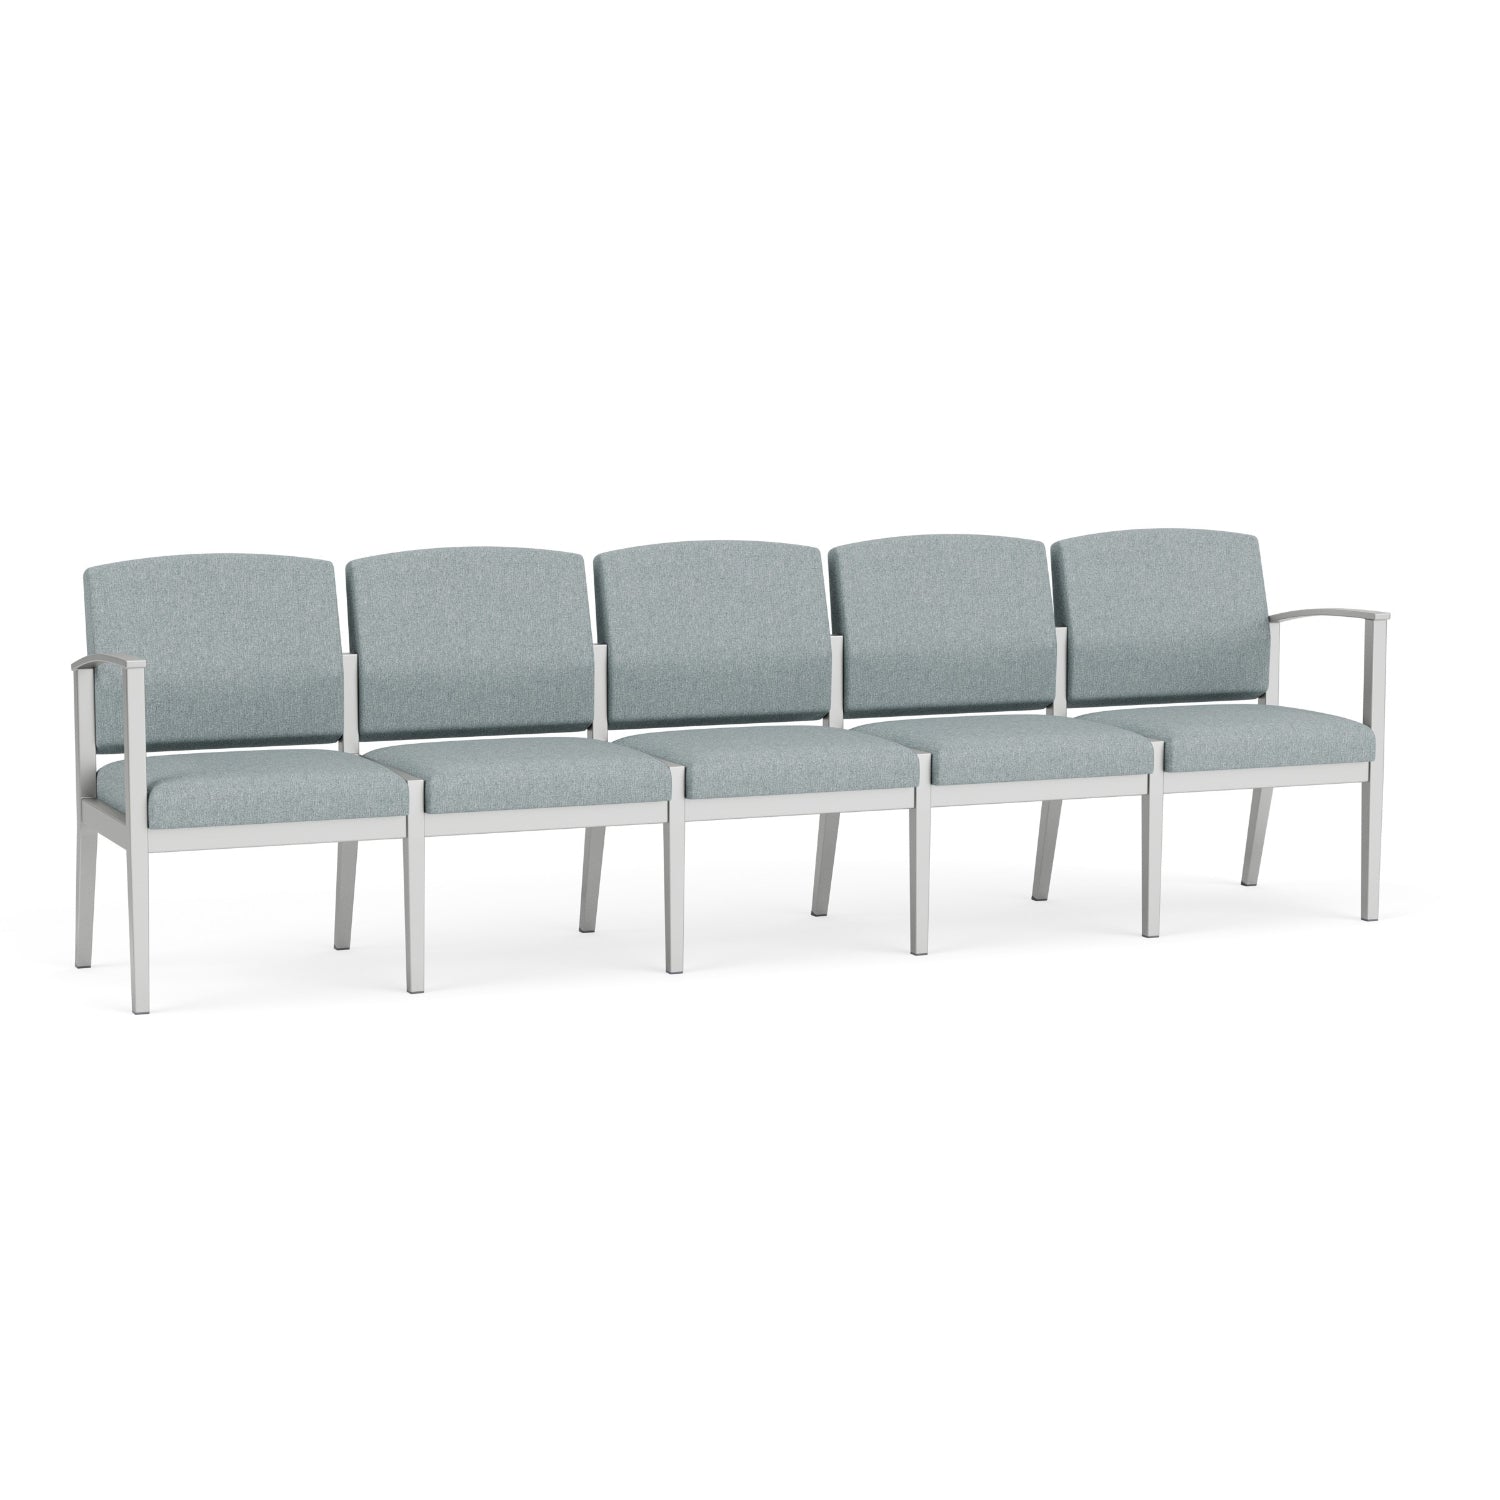 Amherst Steel Collection Reception Seating, 5-Seat Sofa, Healthcare Vinyl Upholstery, FREE SHIPPING